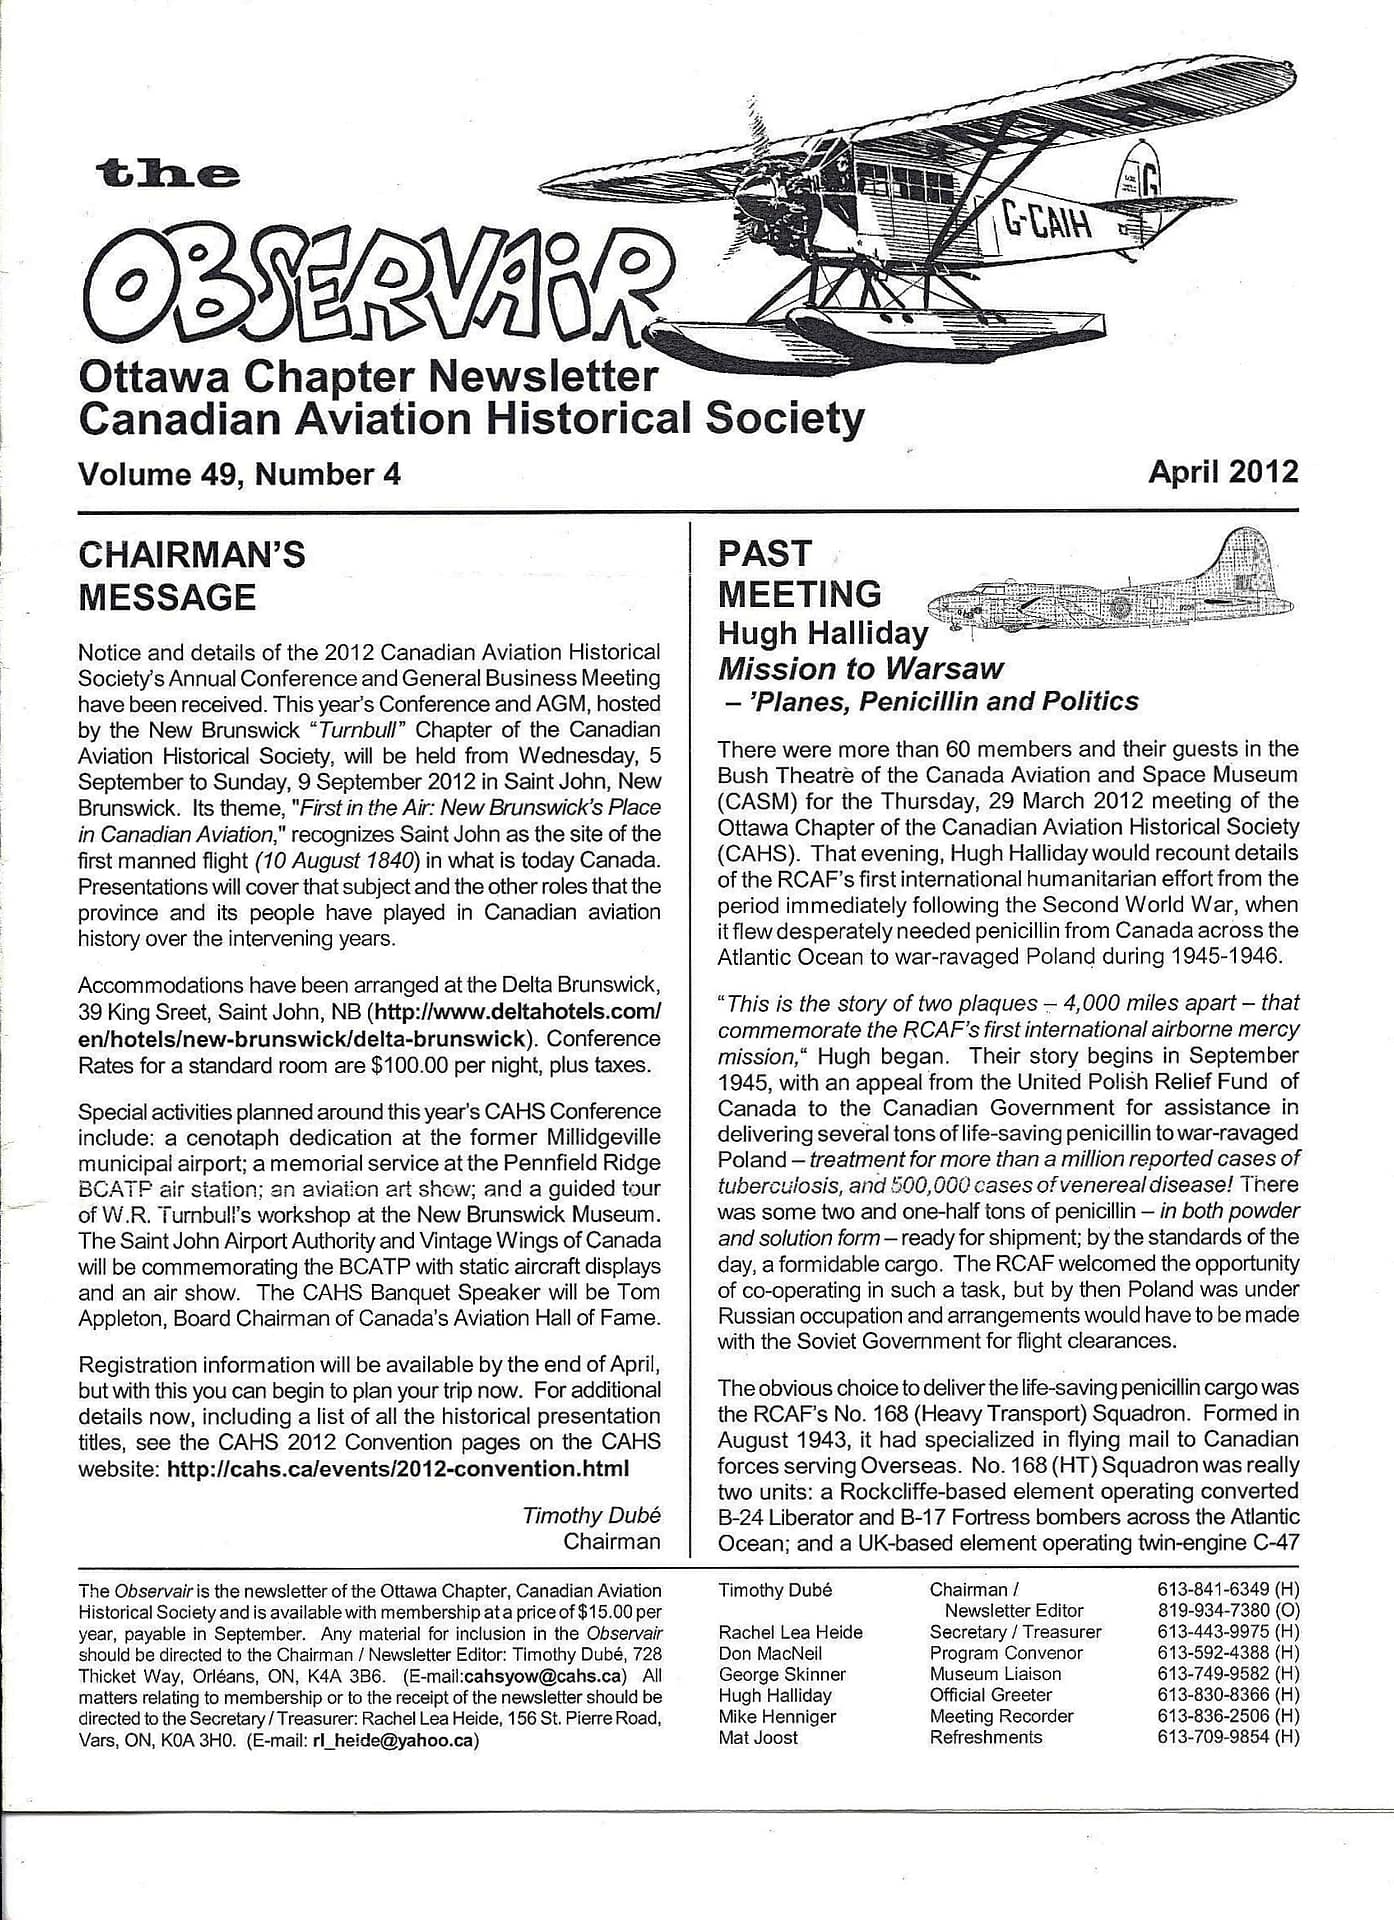 page 1 of Observair newsletter, start of the article Mission to Warsaw by Hugh Halliday